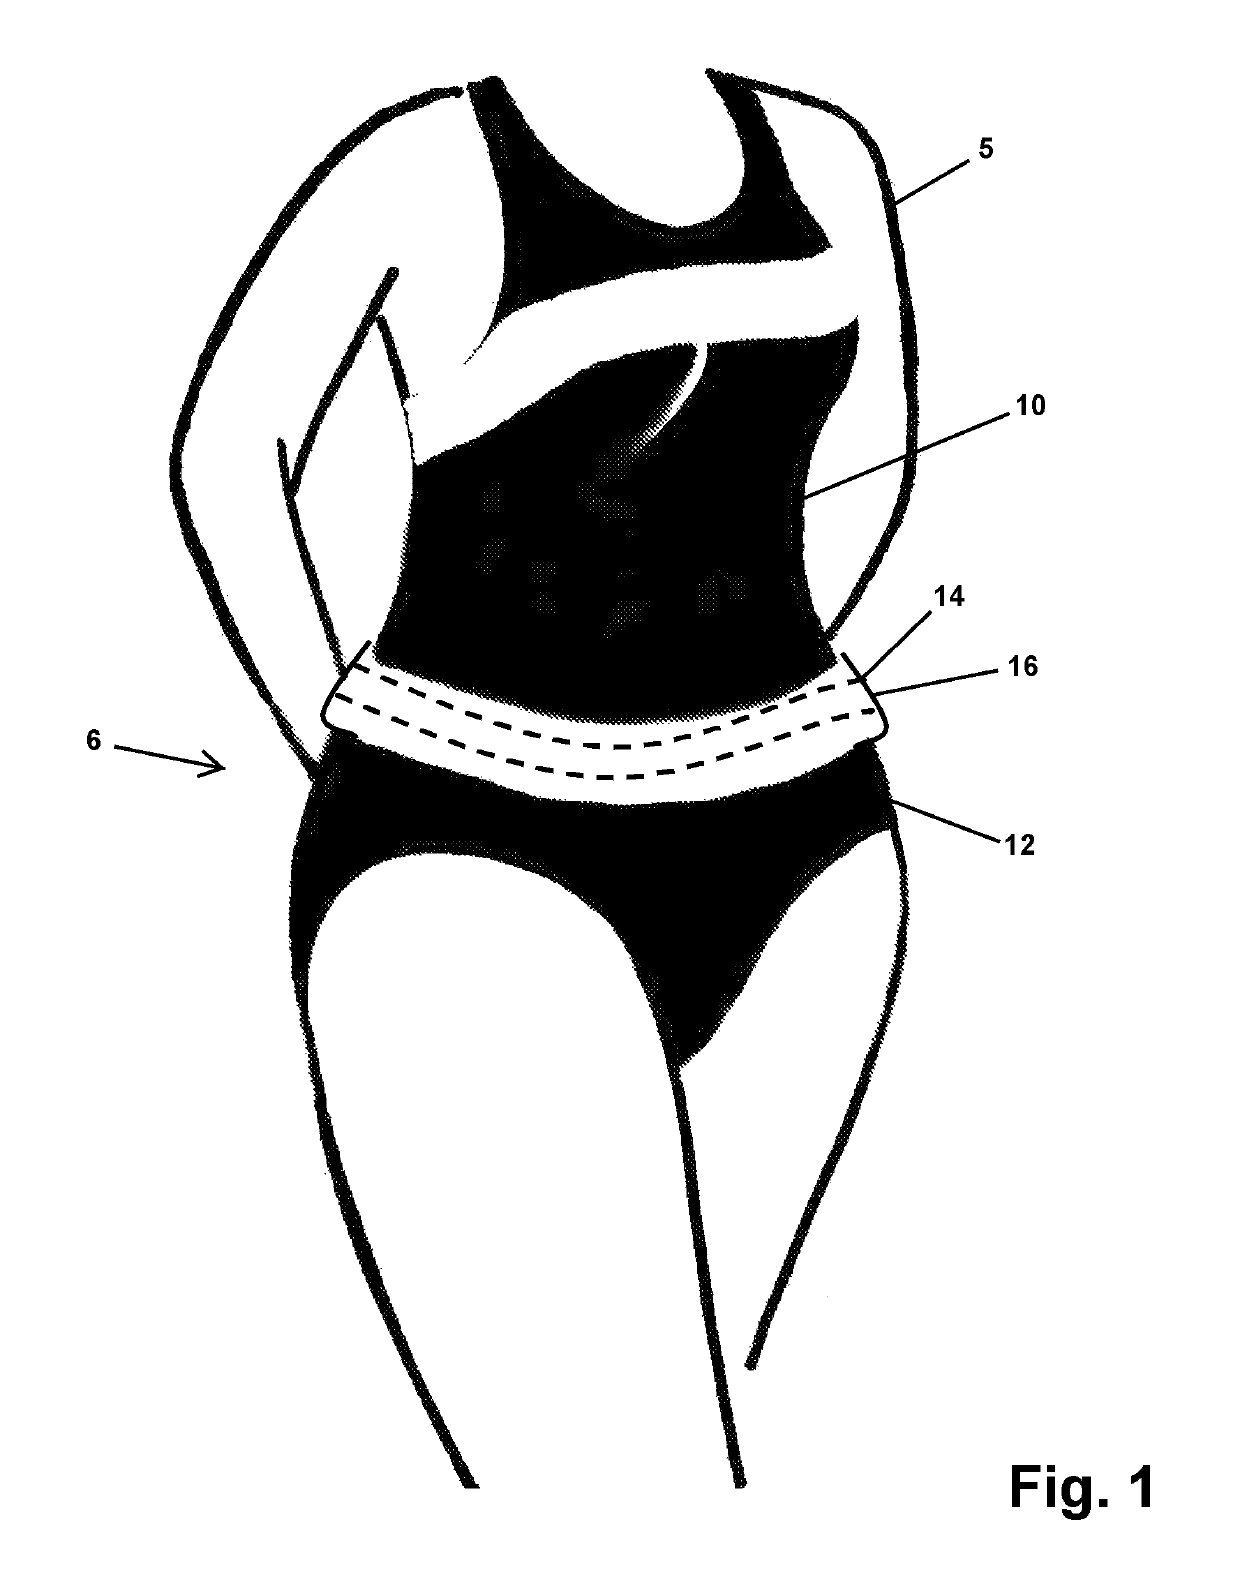 One-piece swimsuit garment with openable waist